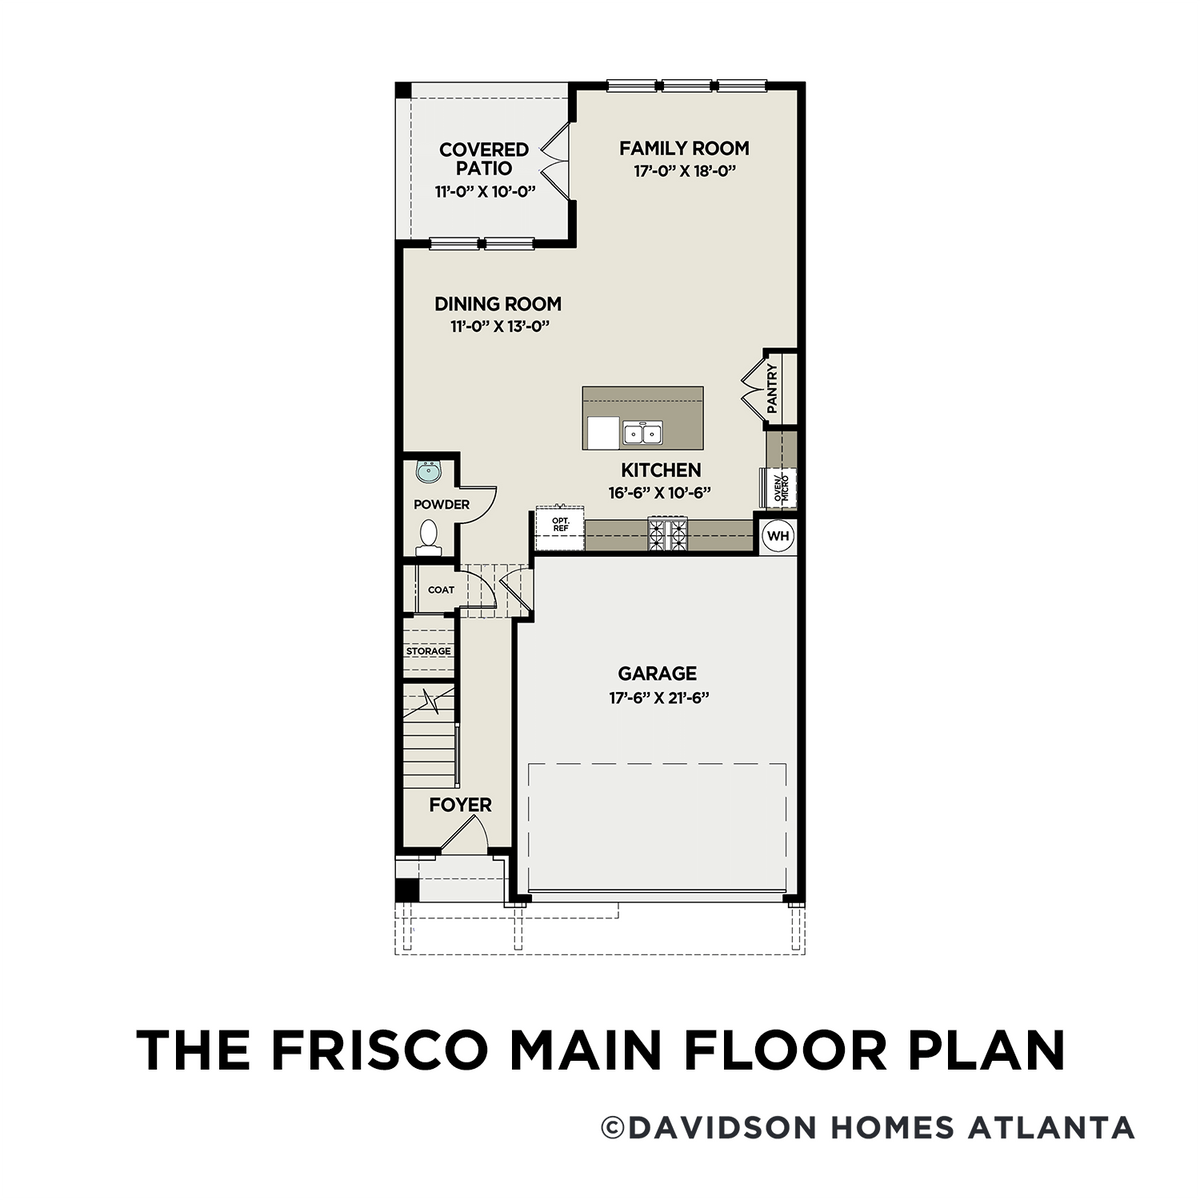 1 - The Frisco B floor plan layout for 701 Stickley Oak Way in Davidson Homes' The Village at Towne Lake community.